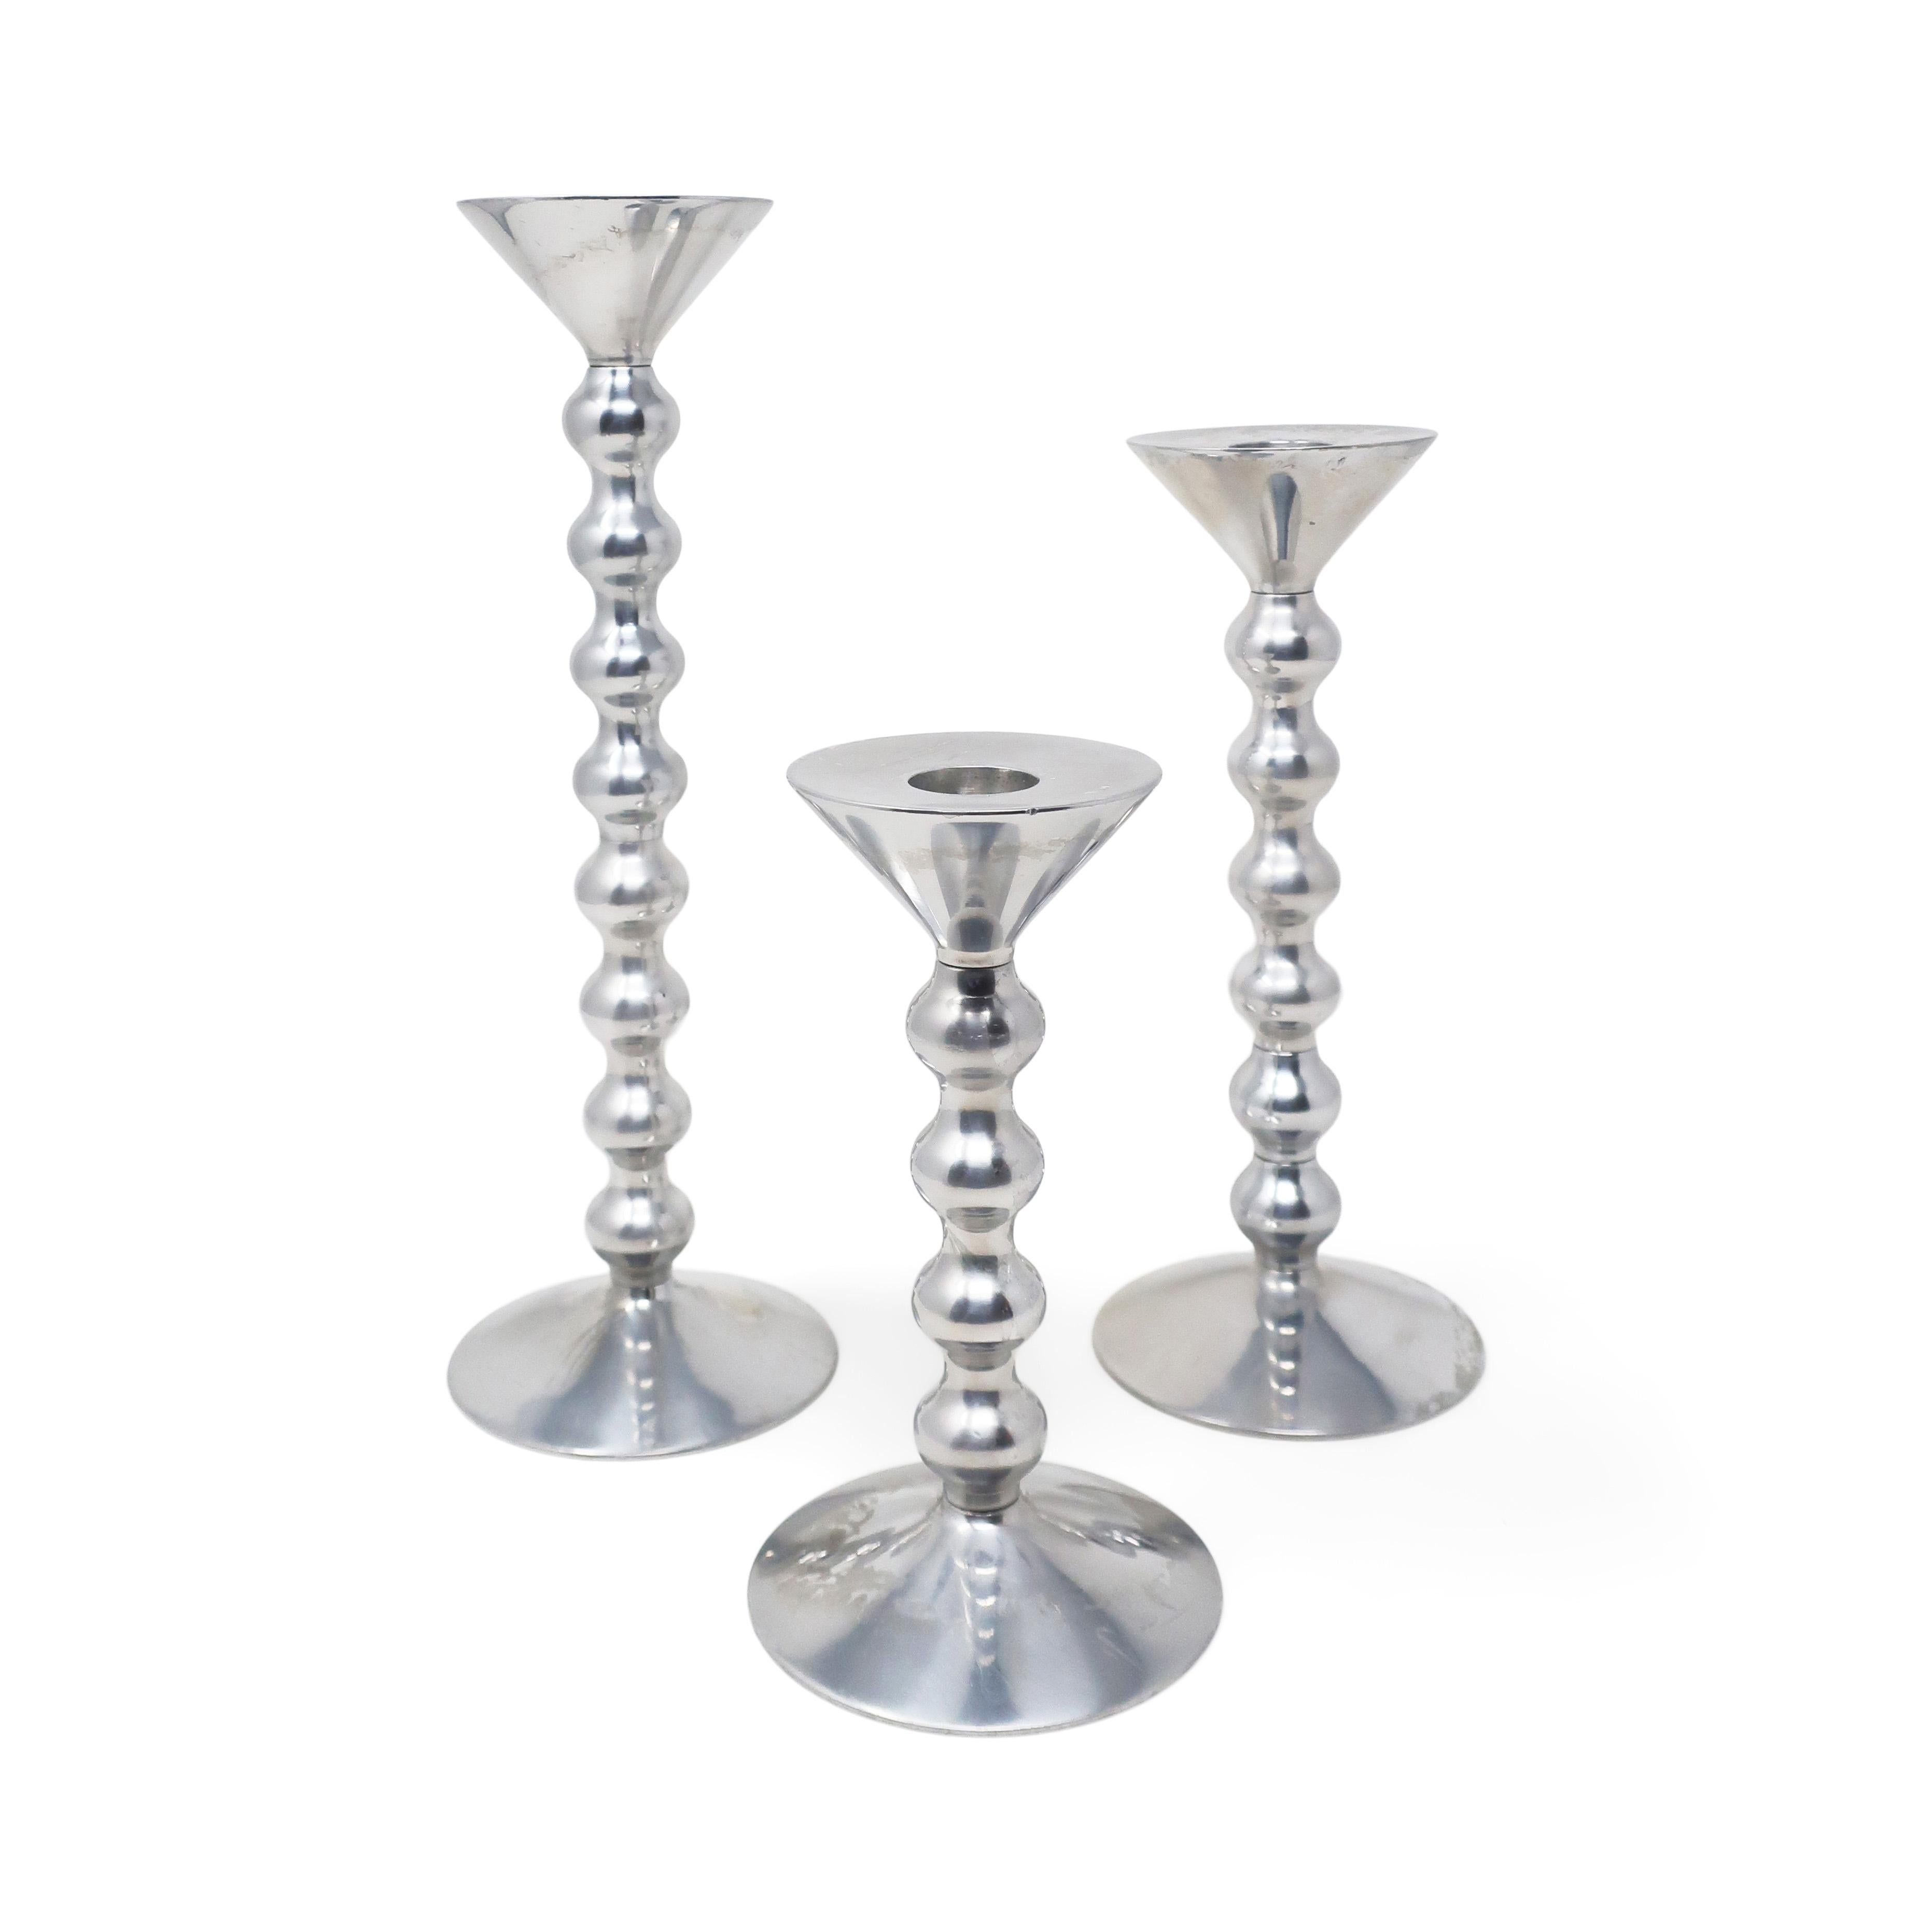 A fantastic set of 4 polished aluminum candlesticks designed by Alessandro Mendini in 2002 for Alessi, the Italian housewares powerhouse. Each candleholder consists of a base, stem piece, and top, which screw together. There are two different size